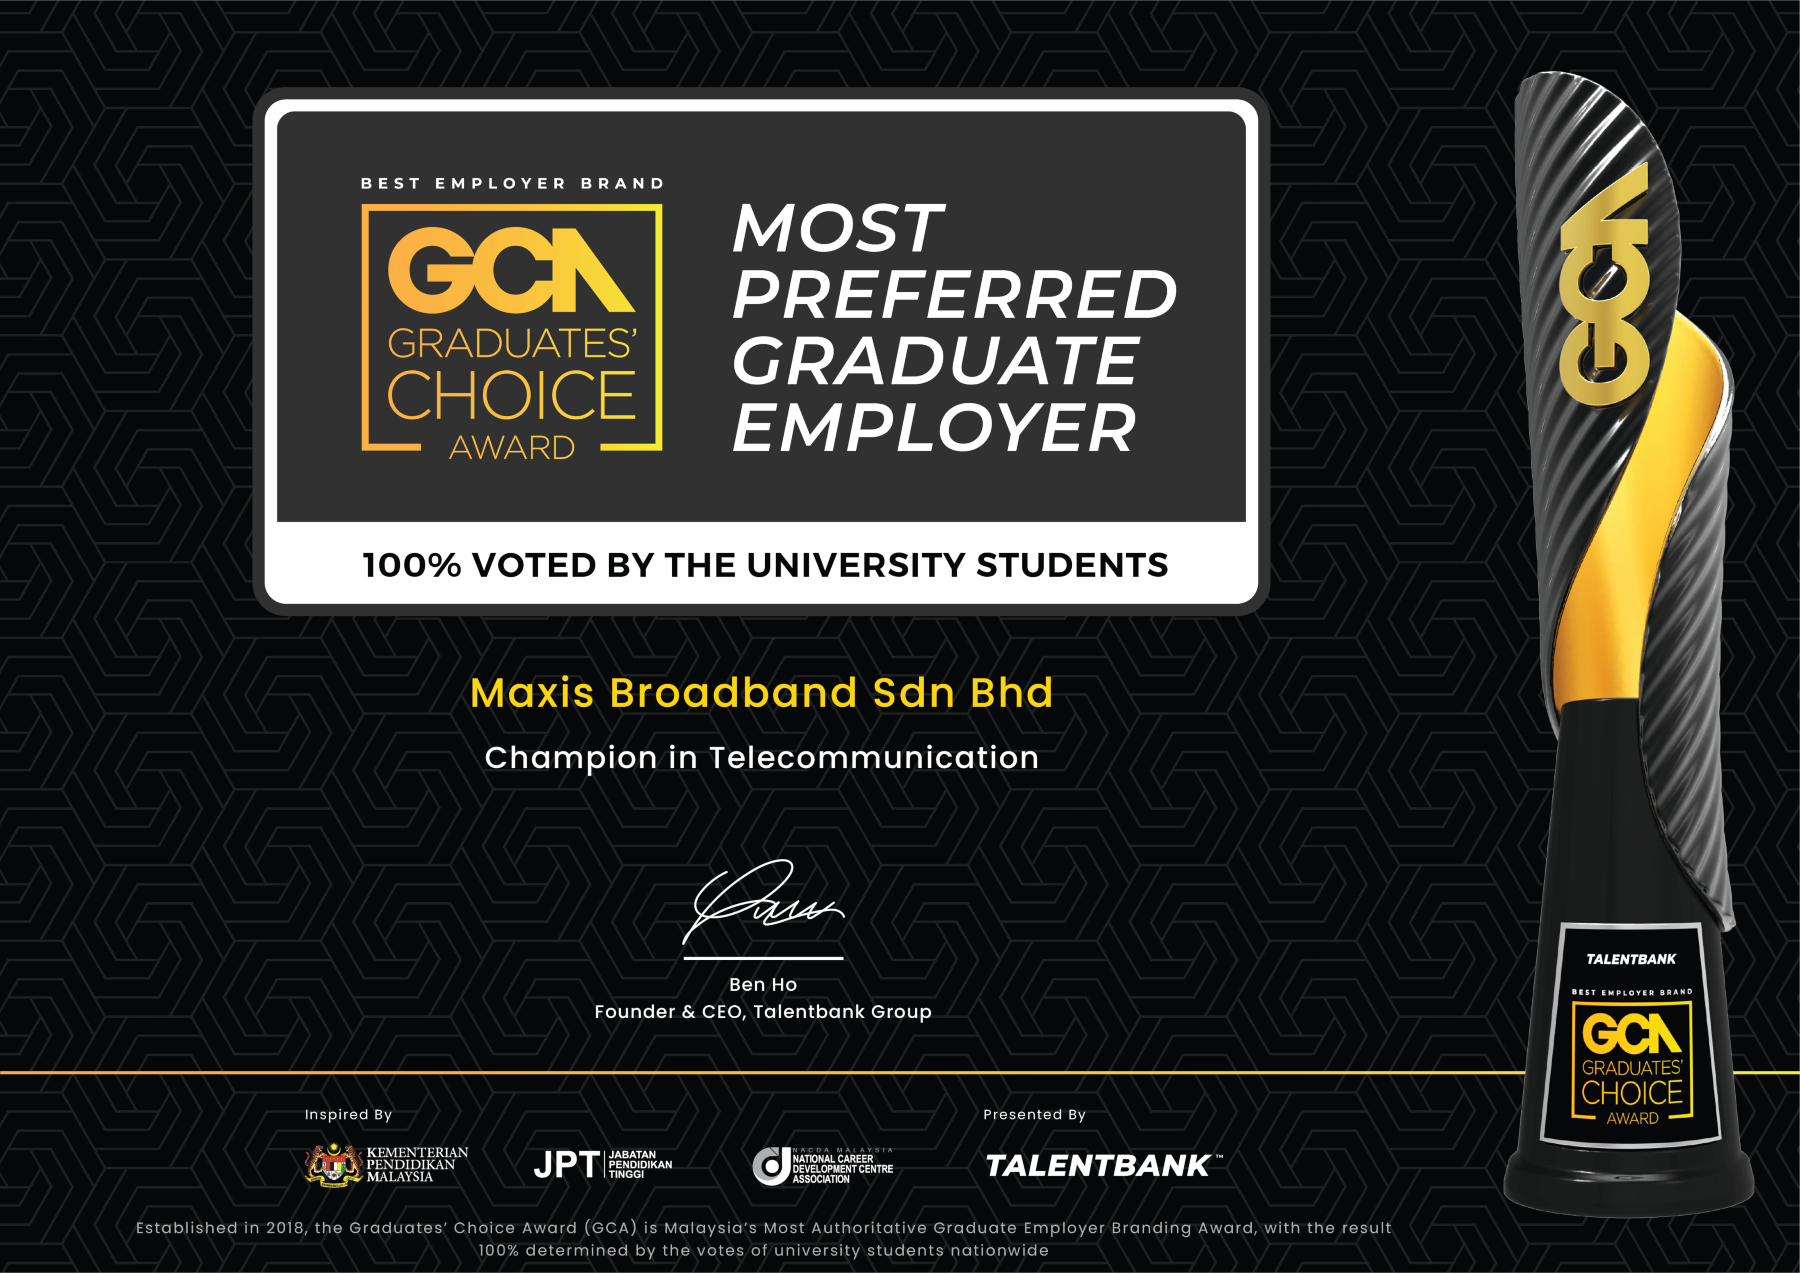 Maxis’ recognition as top employer validated by strong work culture